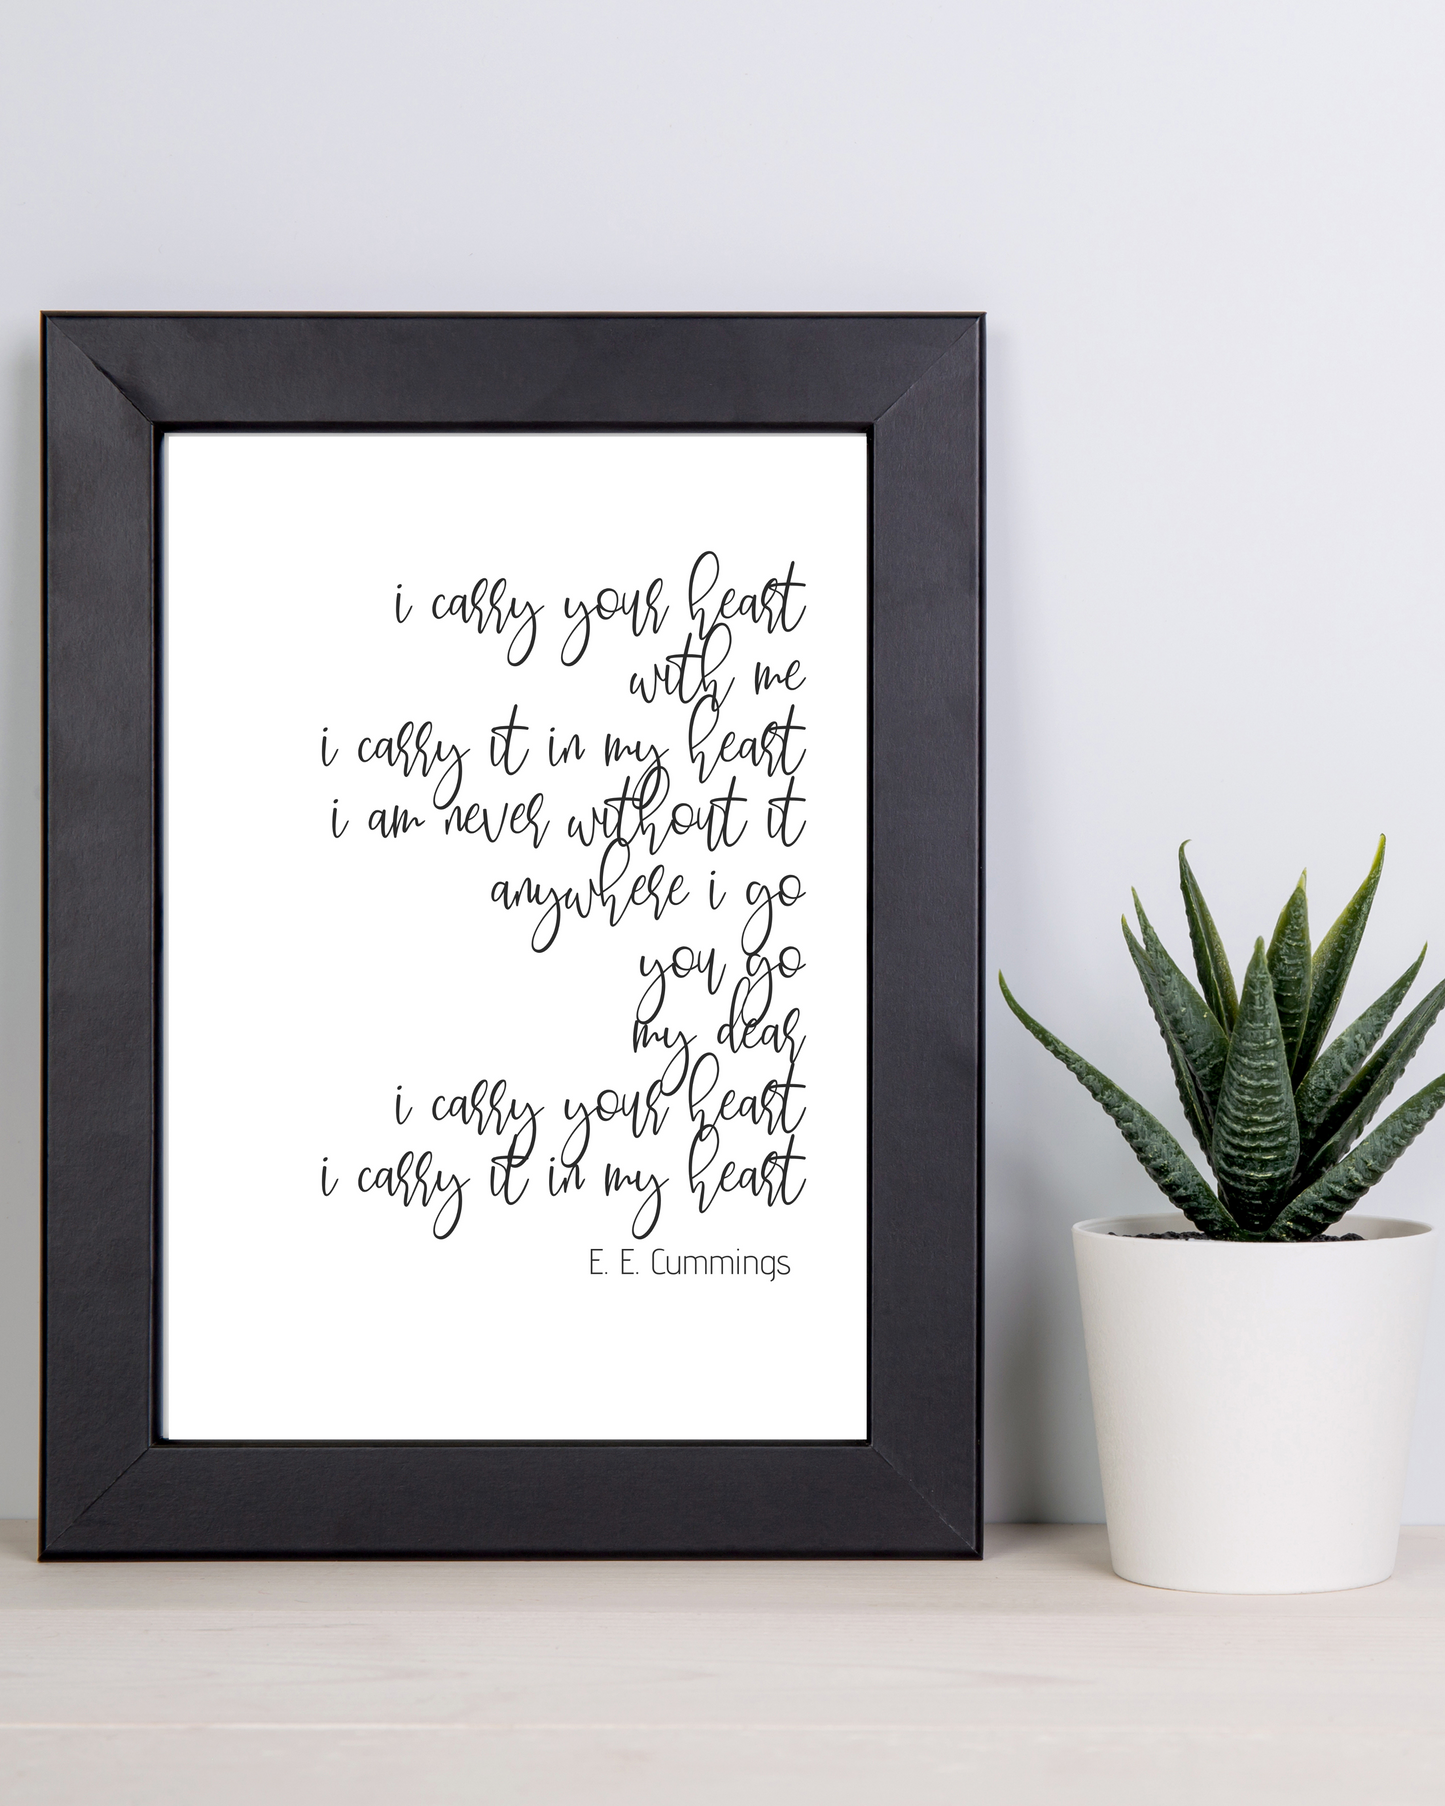 "I Carry Your Heart (I Carry It In My Heart)" by E. E. Cummings, Love Quotes, Printable Art